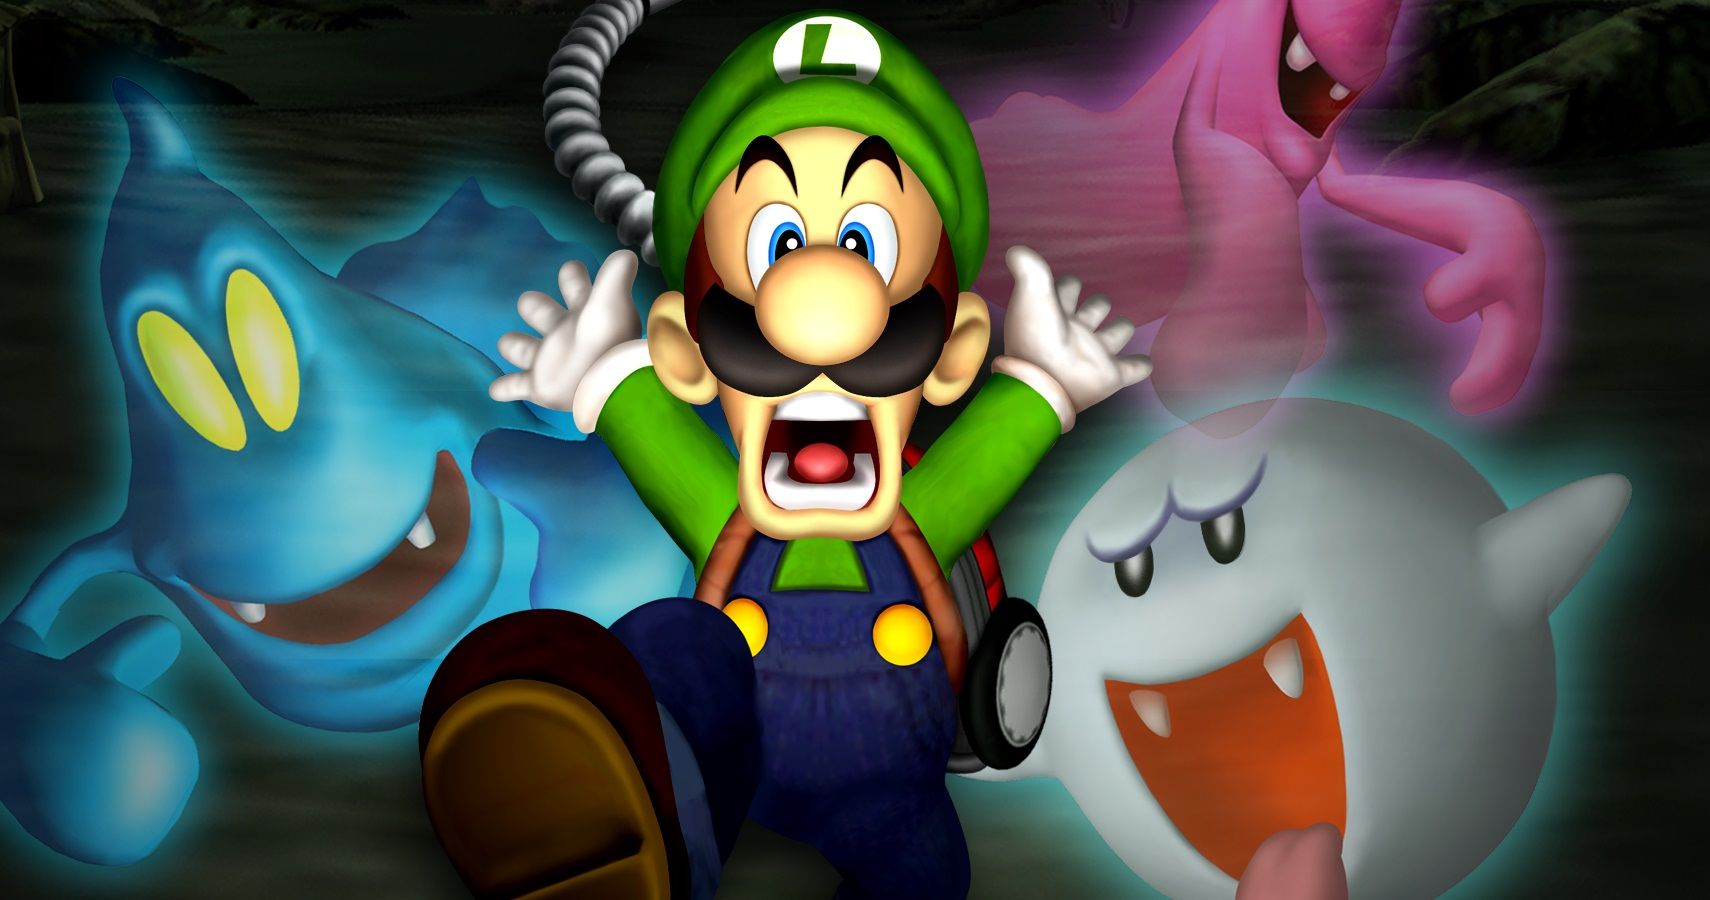 Luigis Mansion 3 Should Be Scary